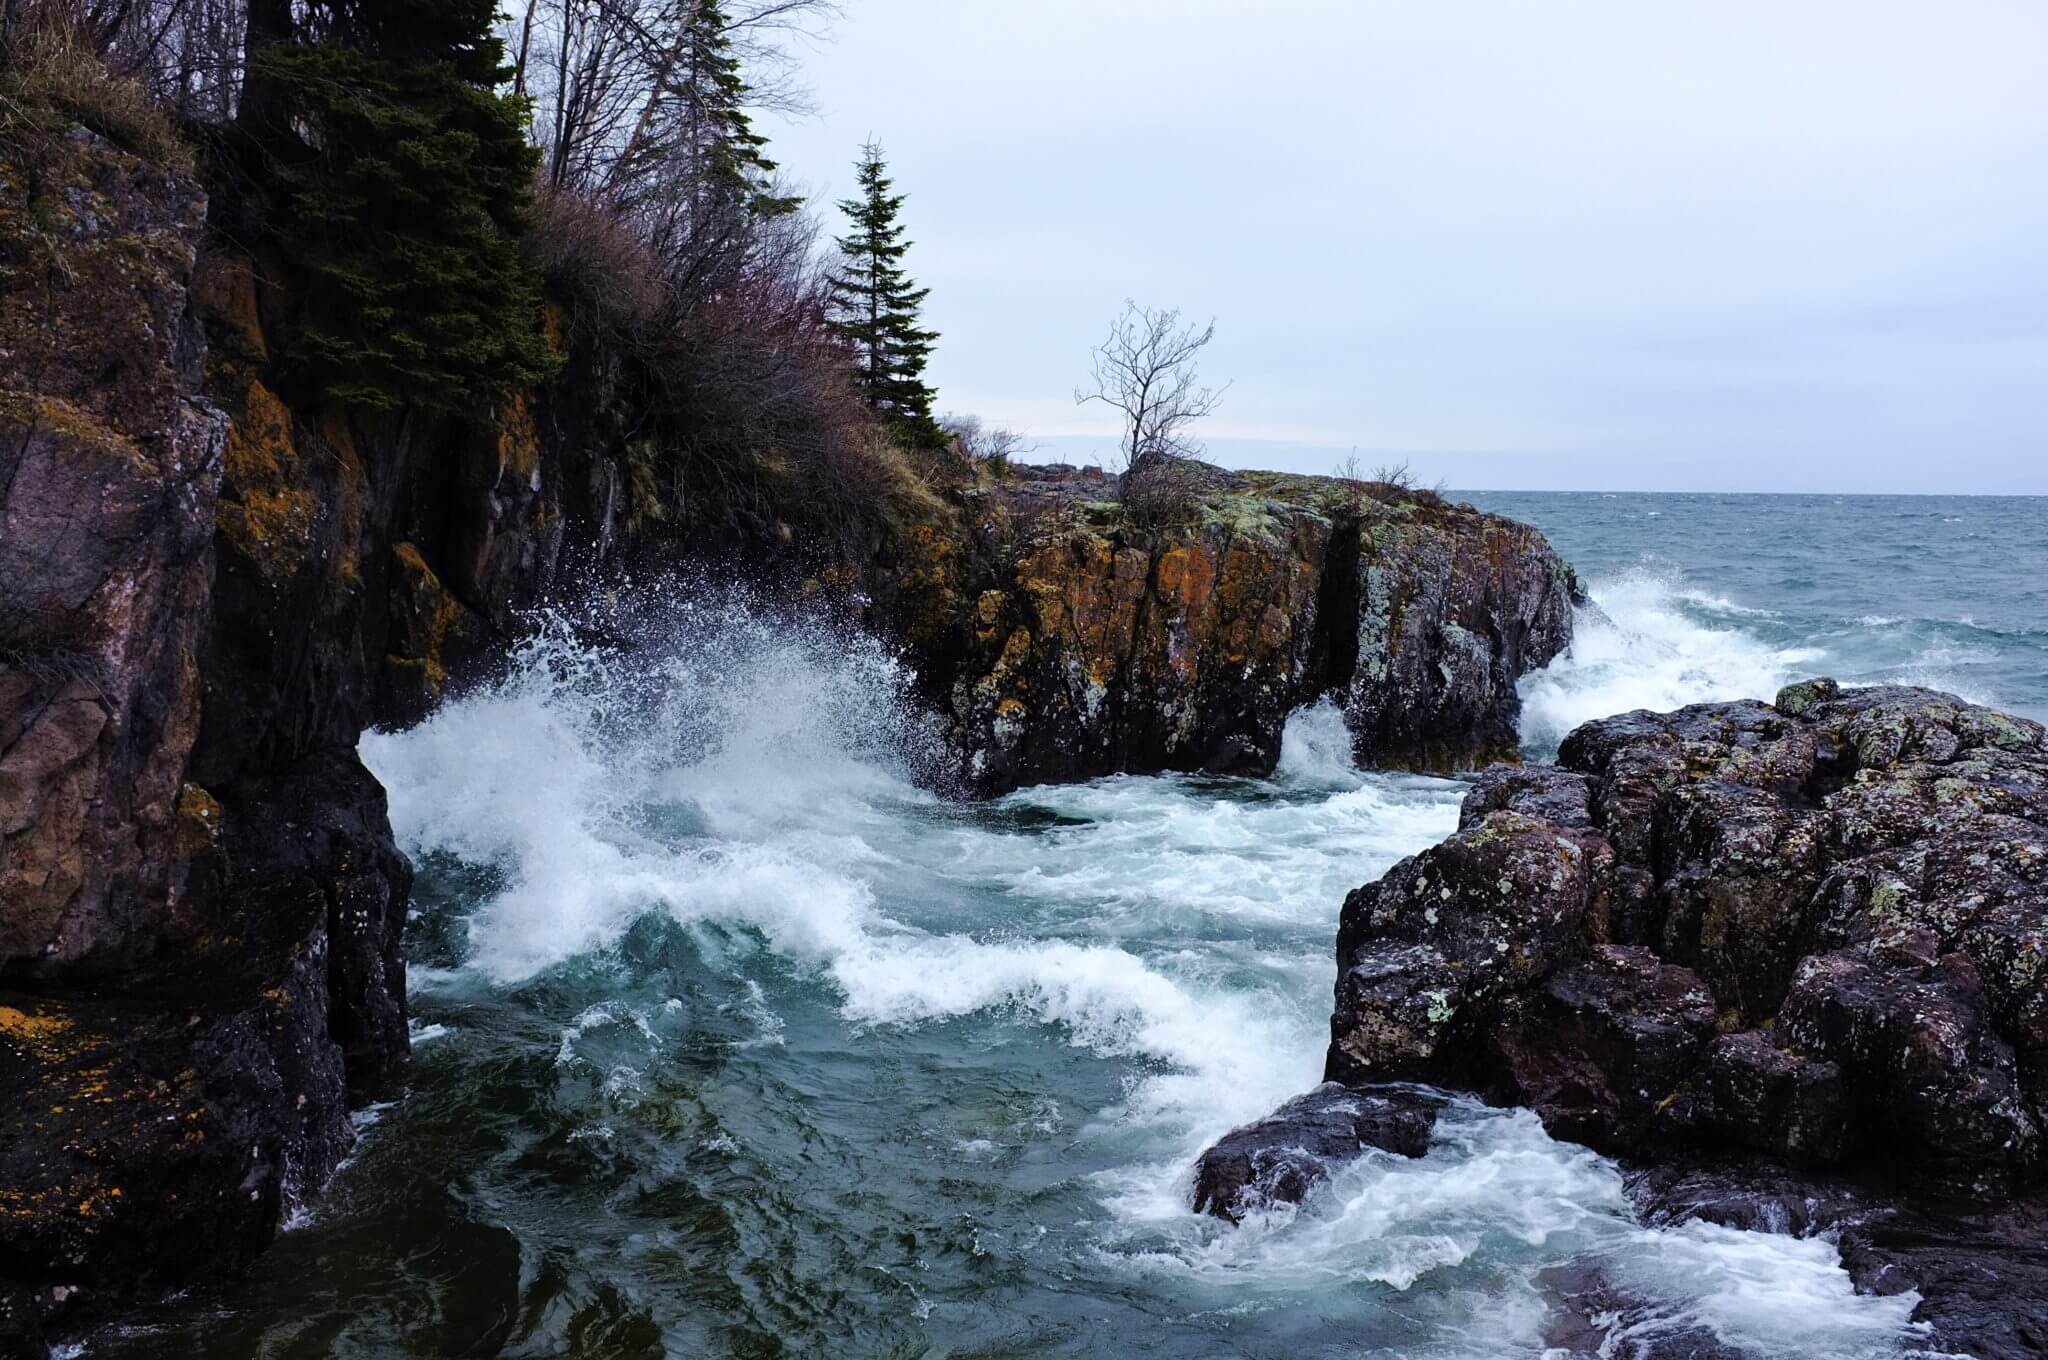 Cove near the mouth of the Temperance river